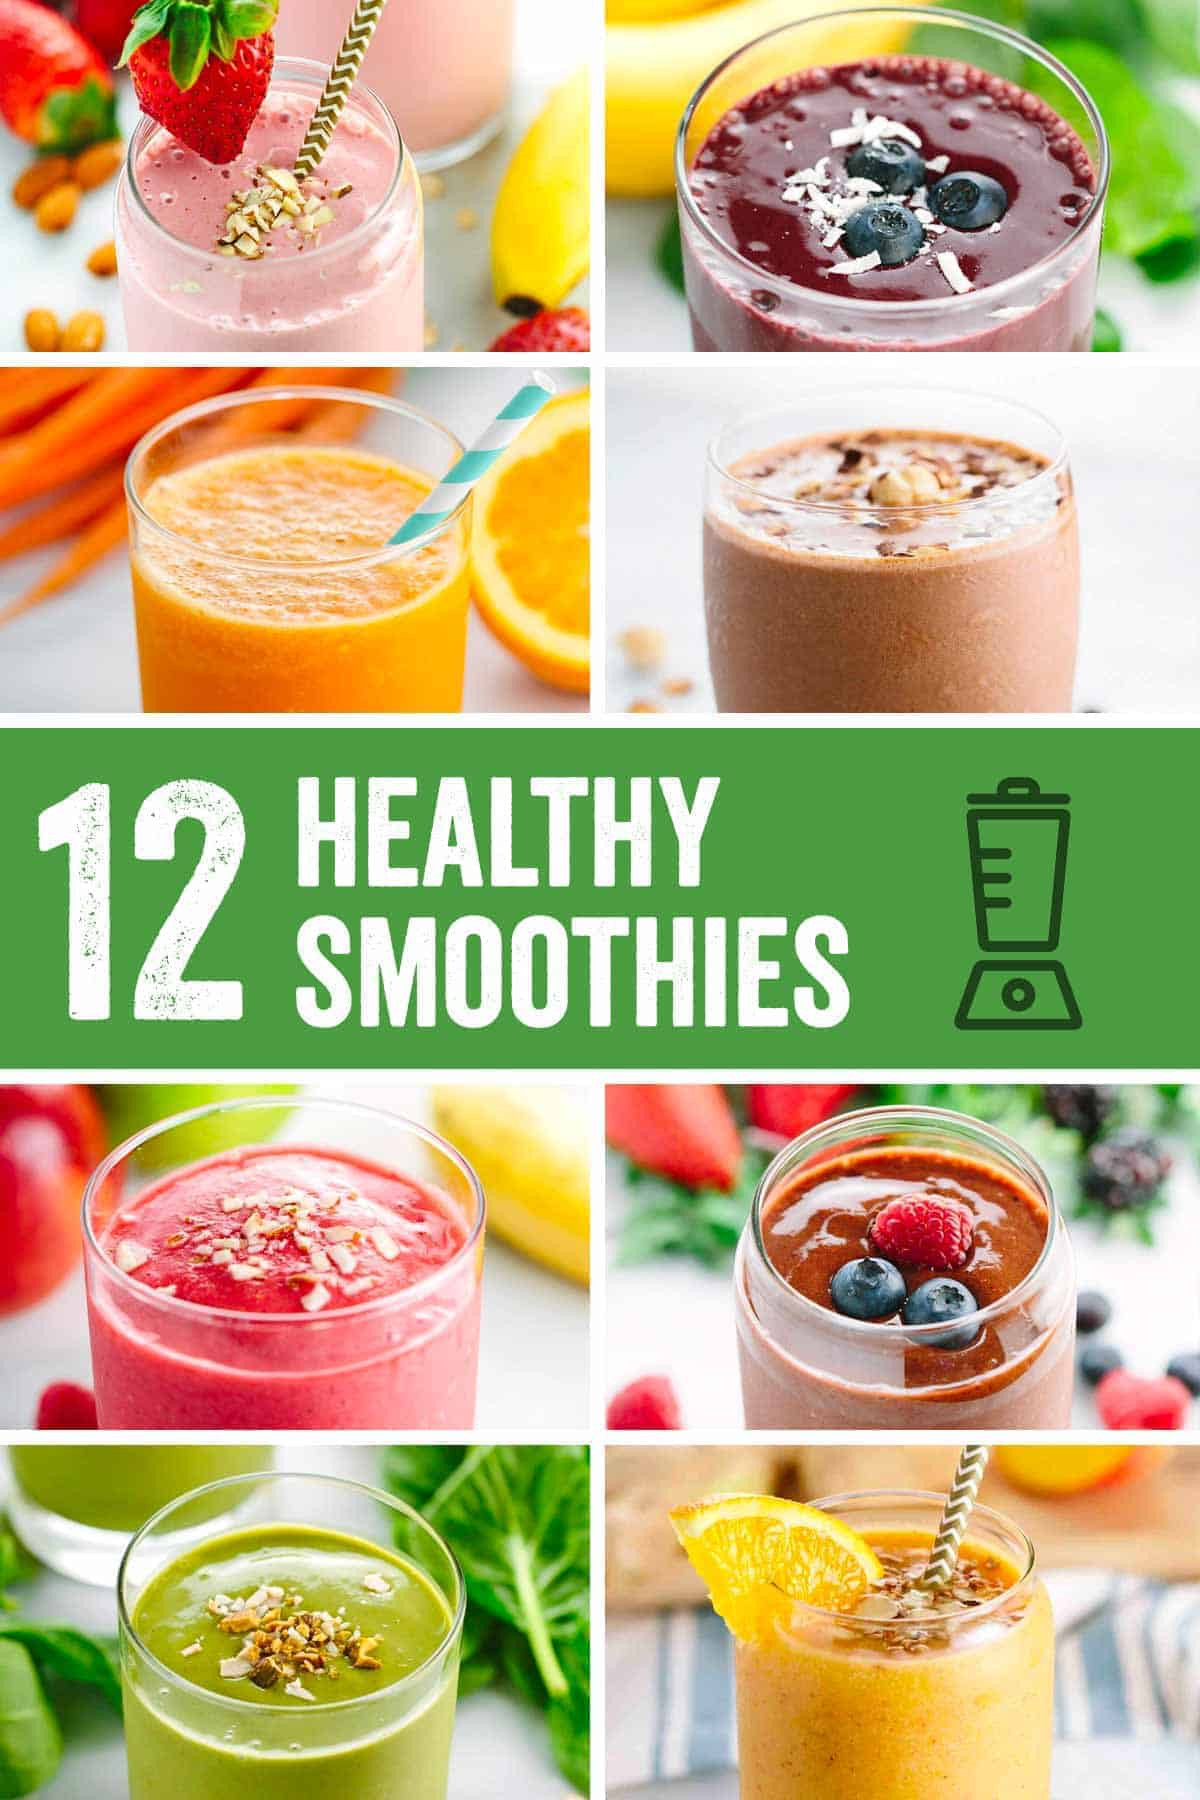 Best Fruit Smoothie Recipes
 Roundup Easy Five Minute Healthy Smoothie Recipes